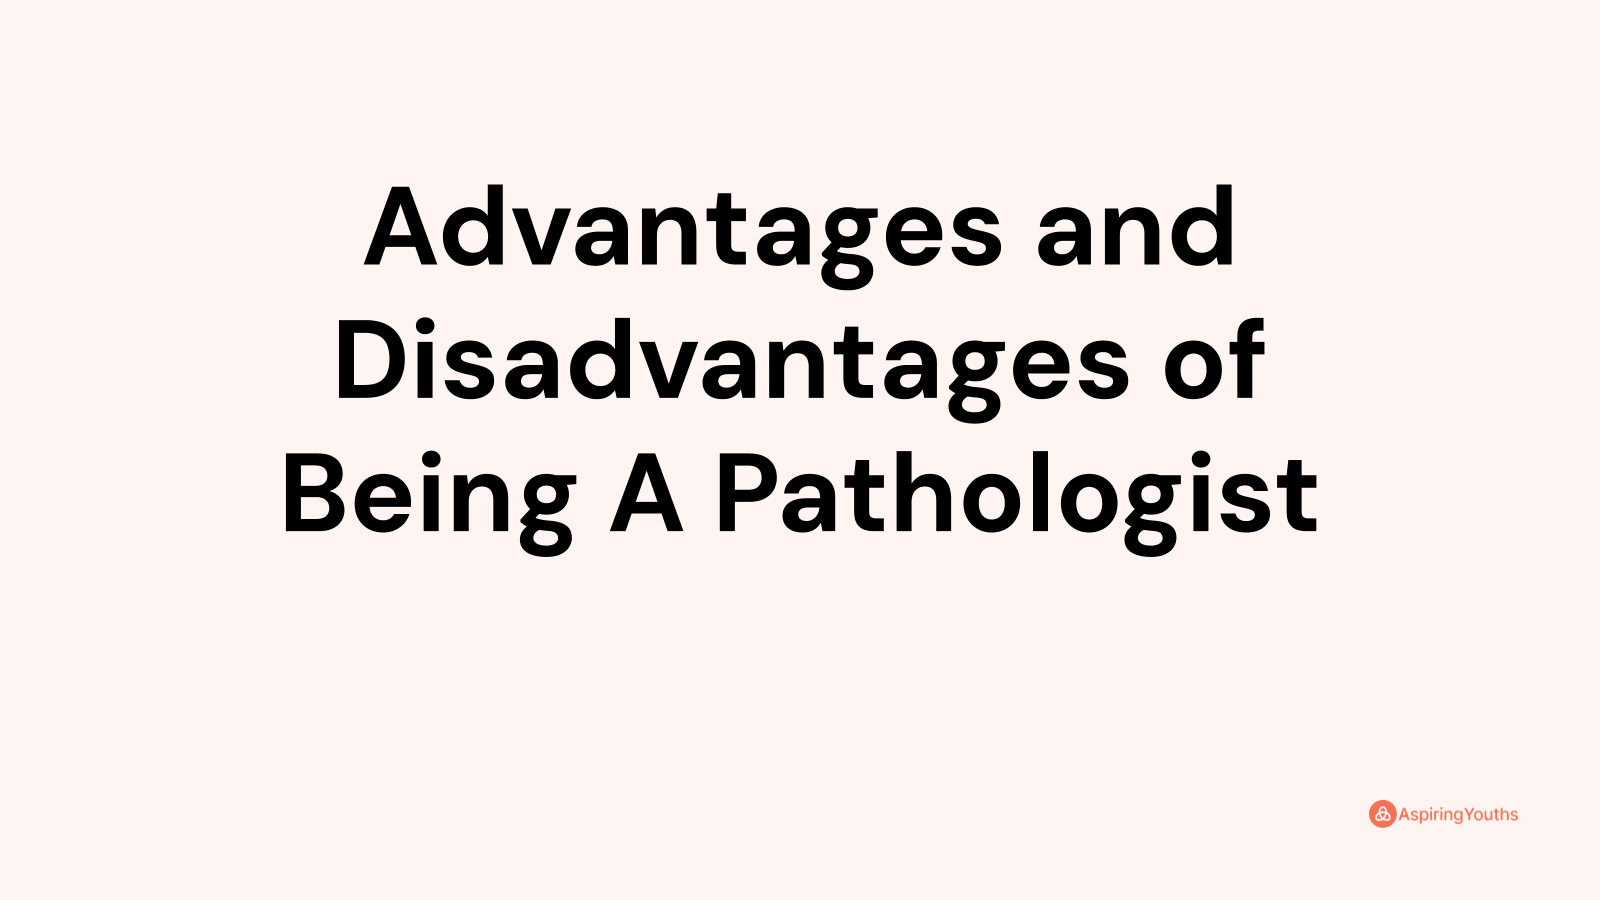 Advantages and disadvantages of Being A Pathologist